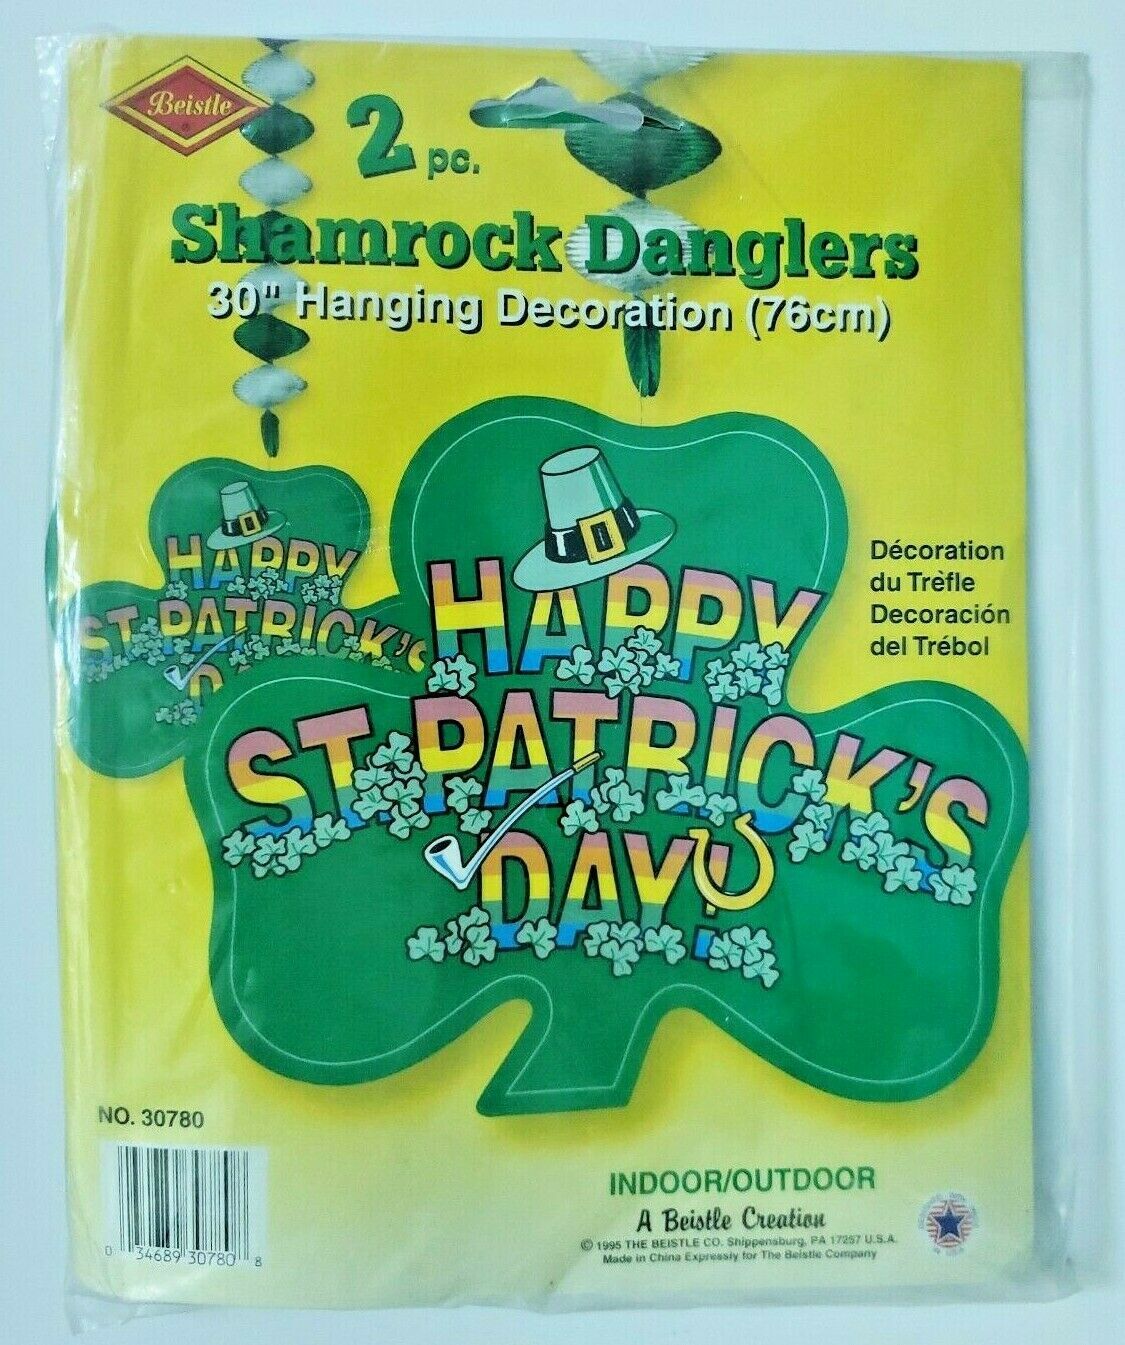 1995 Beistle 30" 2 piece Shamrock Danglers Hanging Decoration New in Package - $19.99